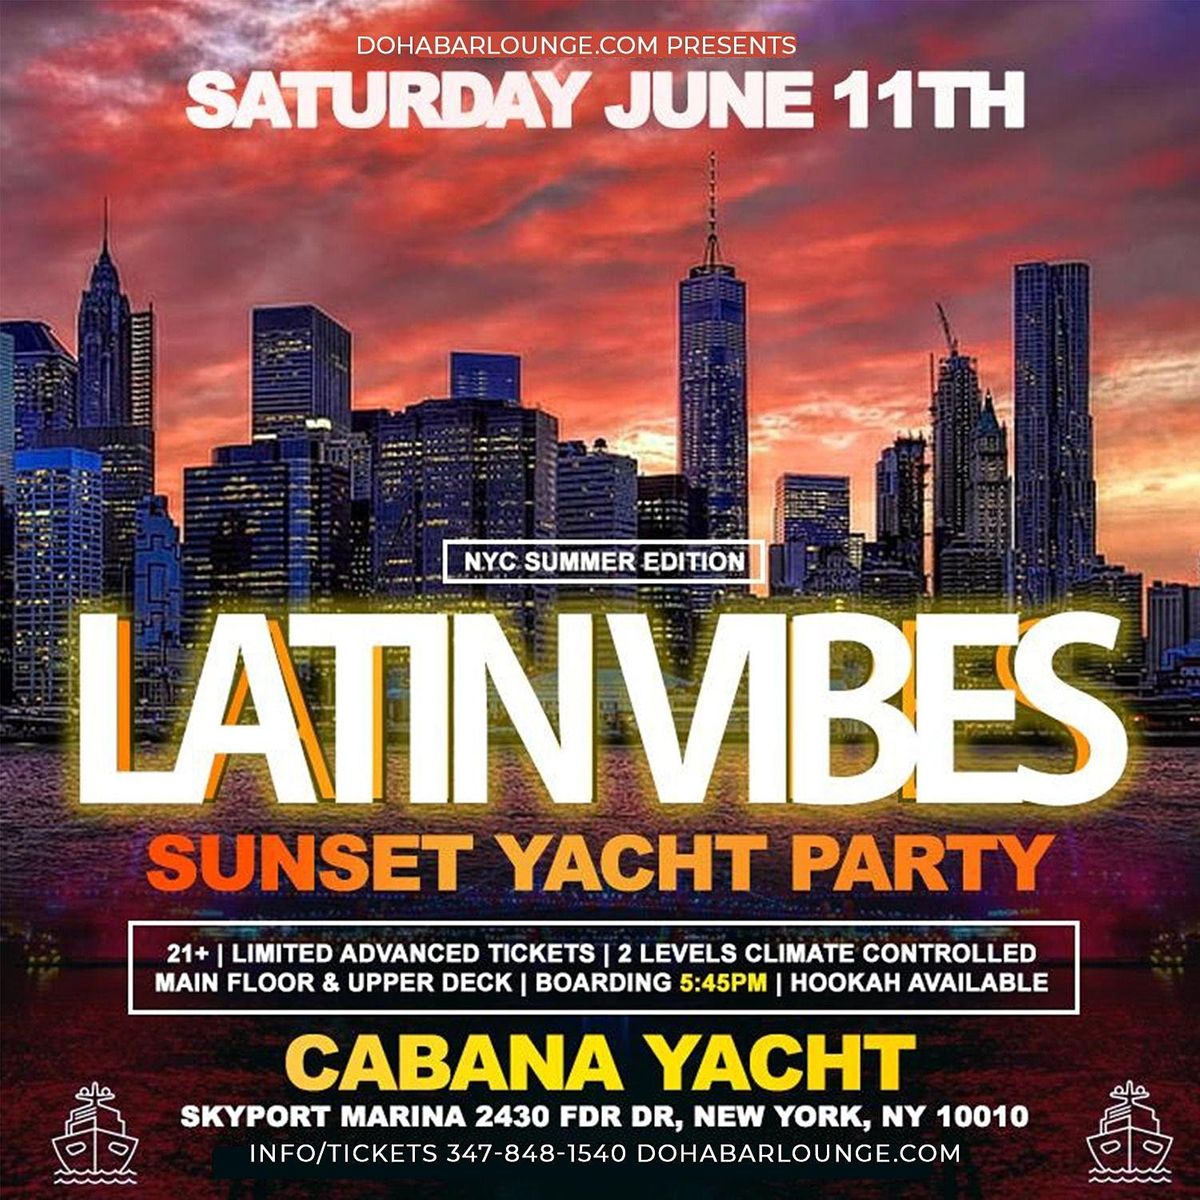 LATIN VIBES - SUNSET YACHT PARTY IN NYC